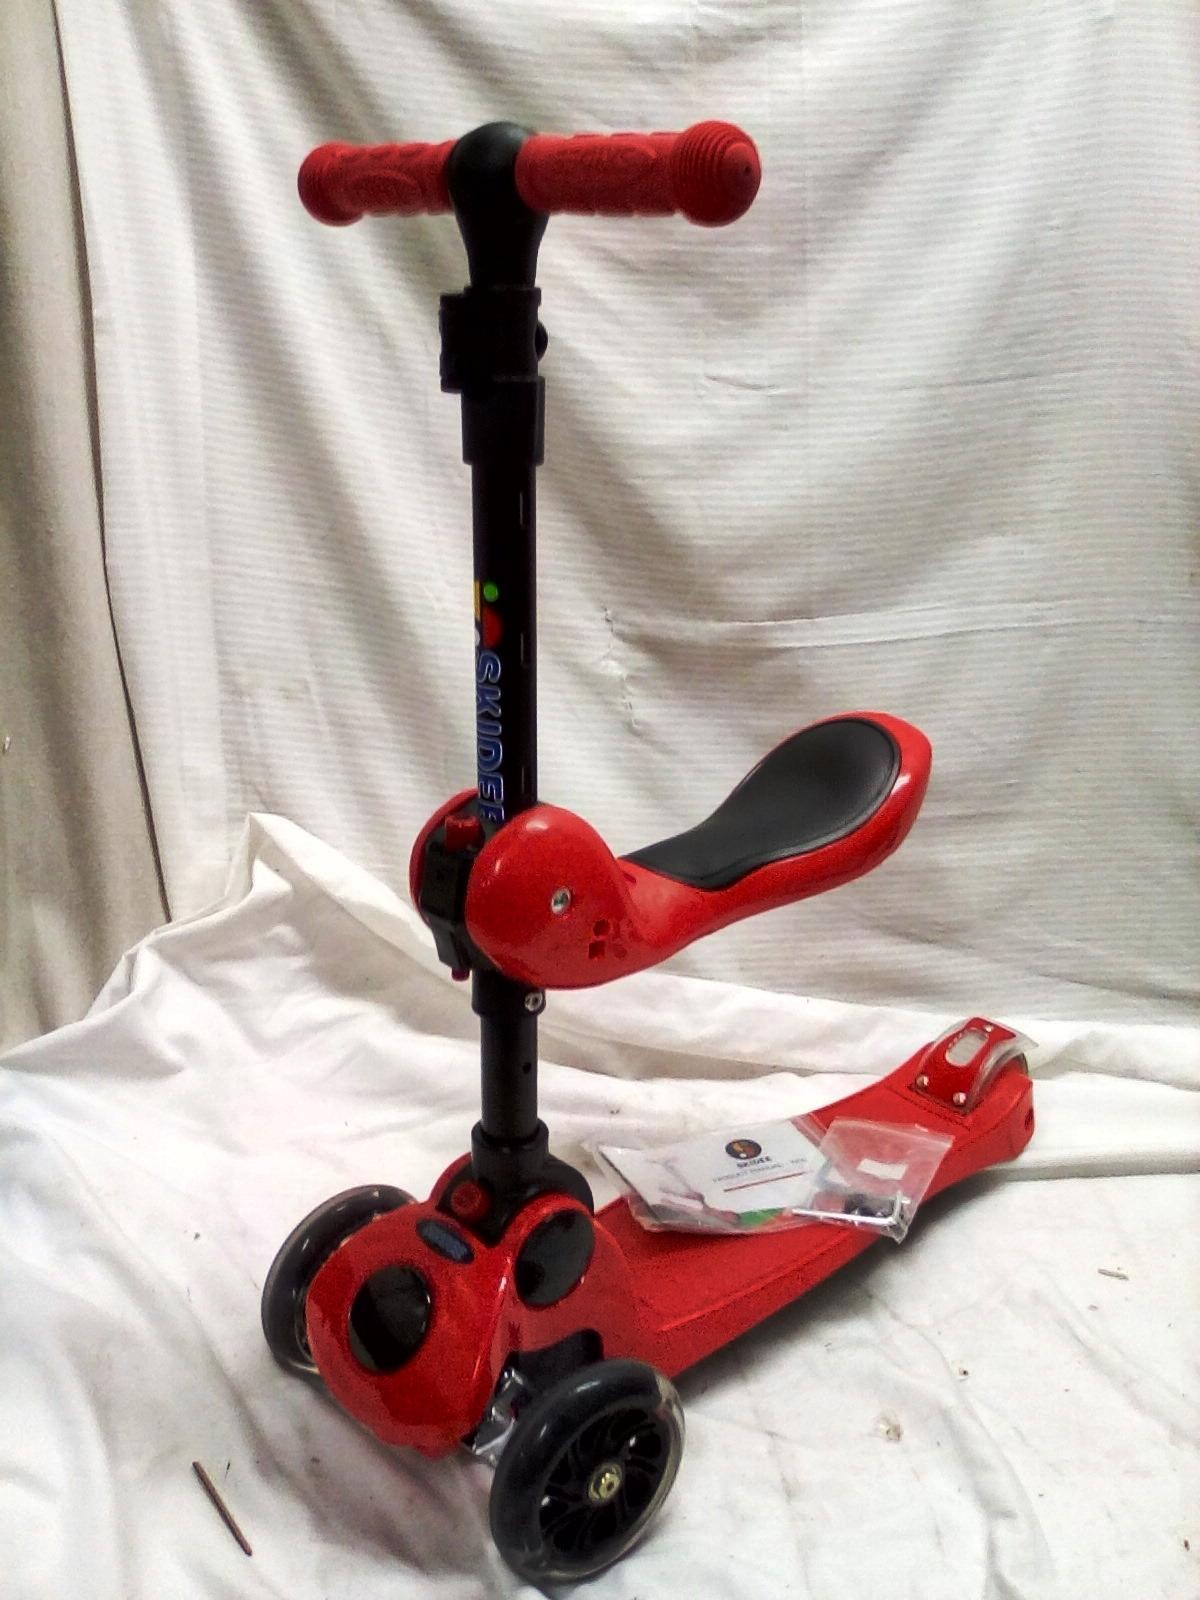 Skidee Child's Scooter W/ Hide-away Seat